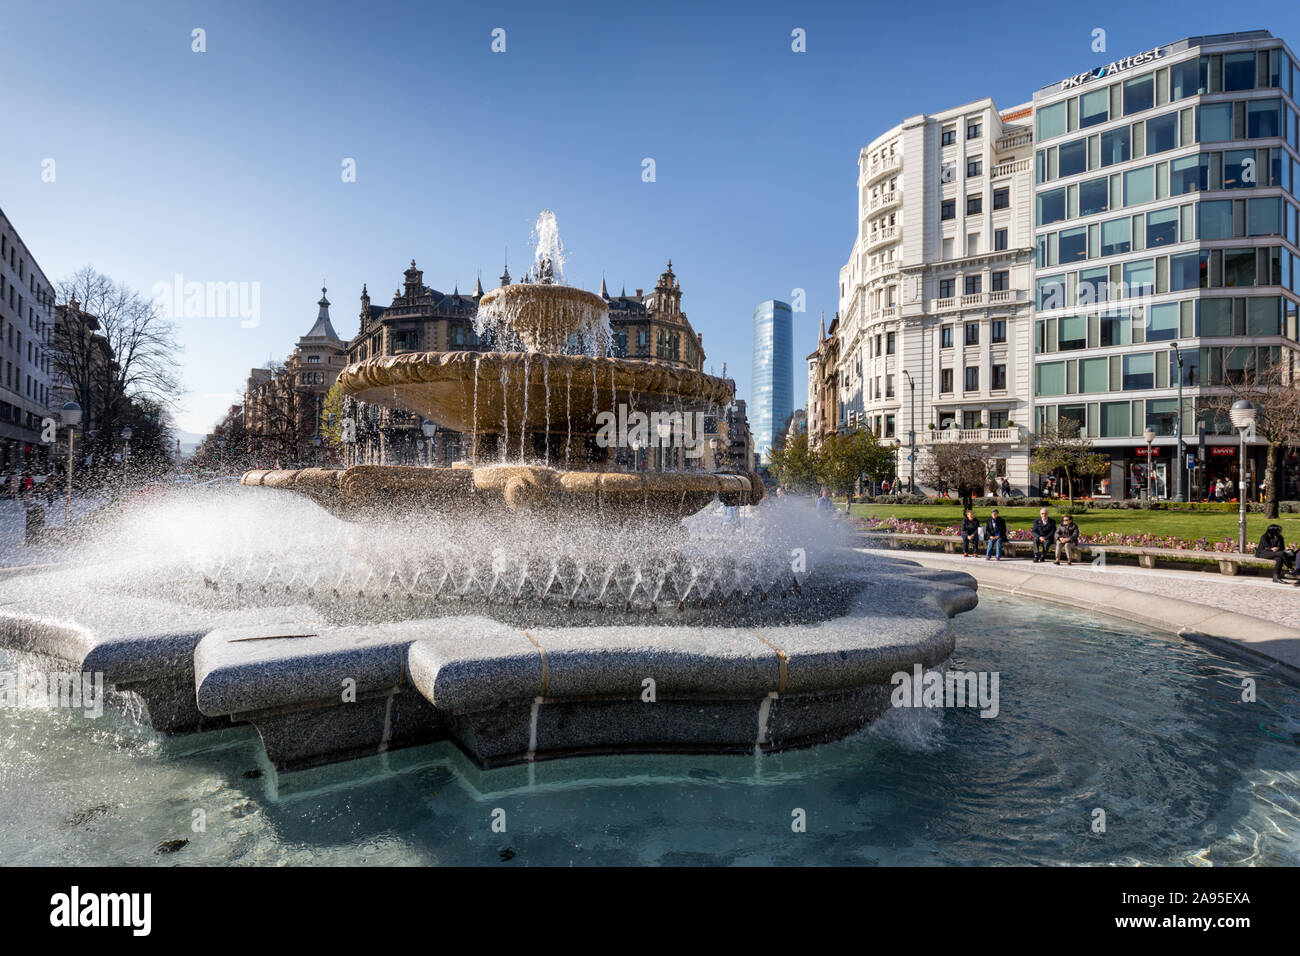 Water fountain at the Plaza de Federico Moyúa or the Elliptical Square, was built in the early 1940s by the architect Jose Luis. Bilbao, Spain. Stock Photo